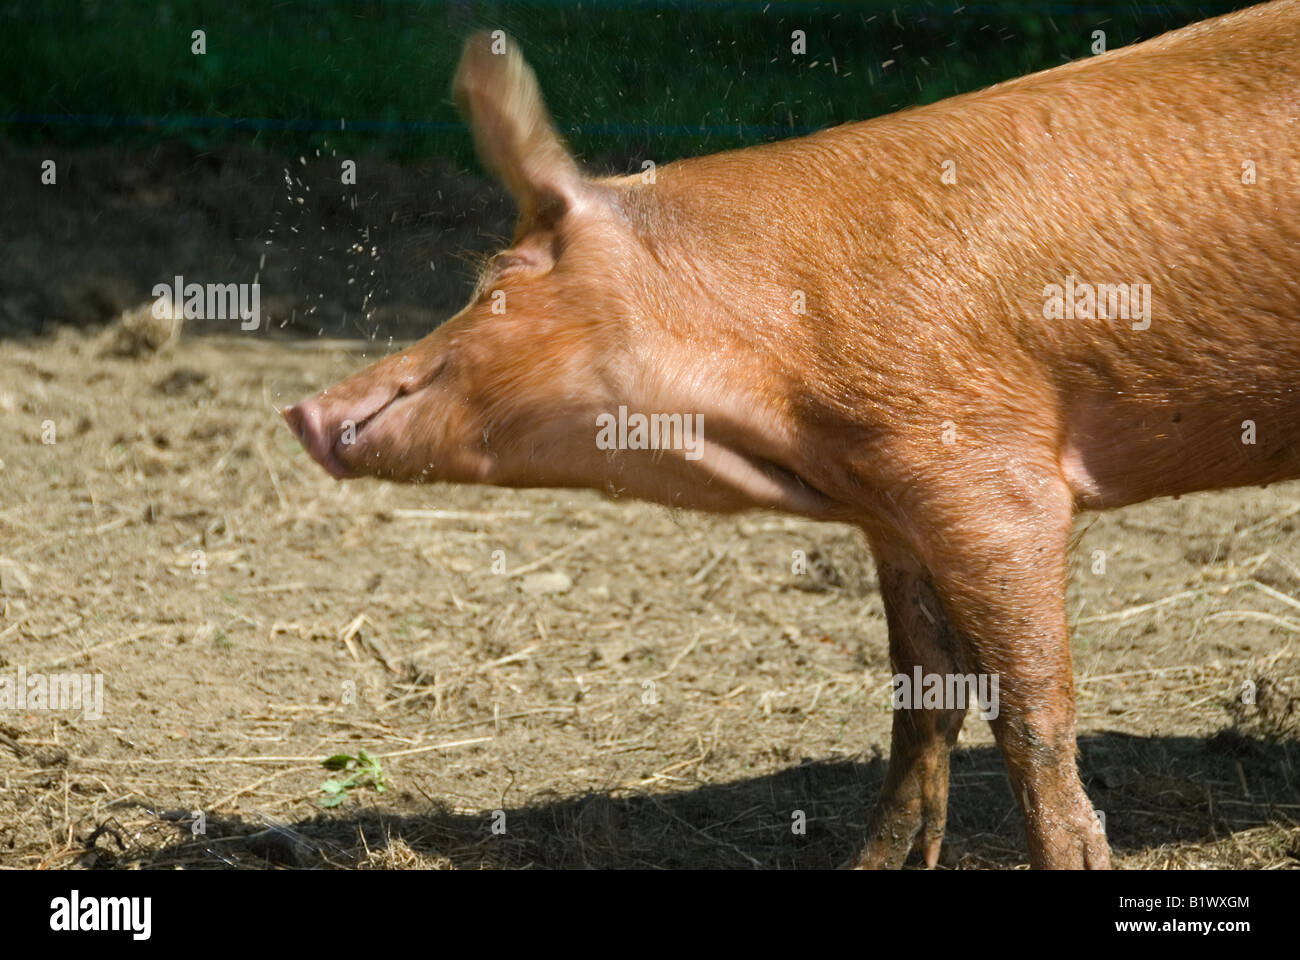 https://c8.alamy.com/comp/B1WXGM/stock-photo-of-a-tamworth-pig-being-showered-with-water-the-image-B1WXGM.jpg